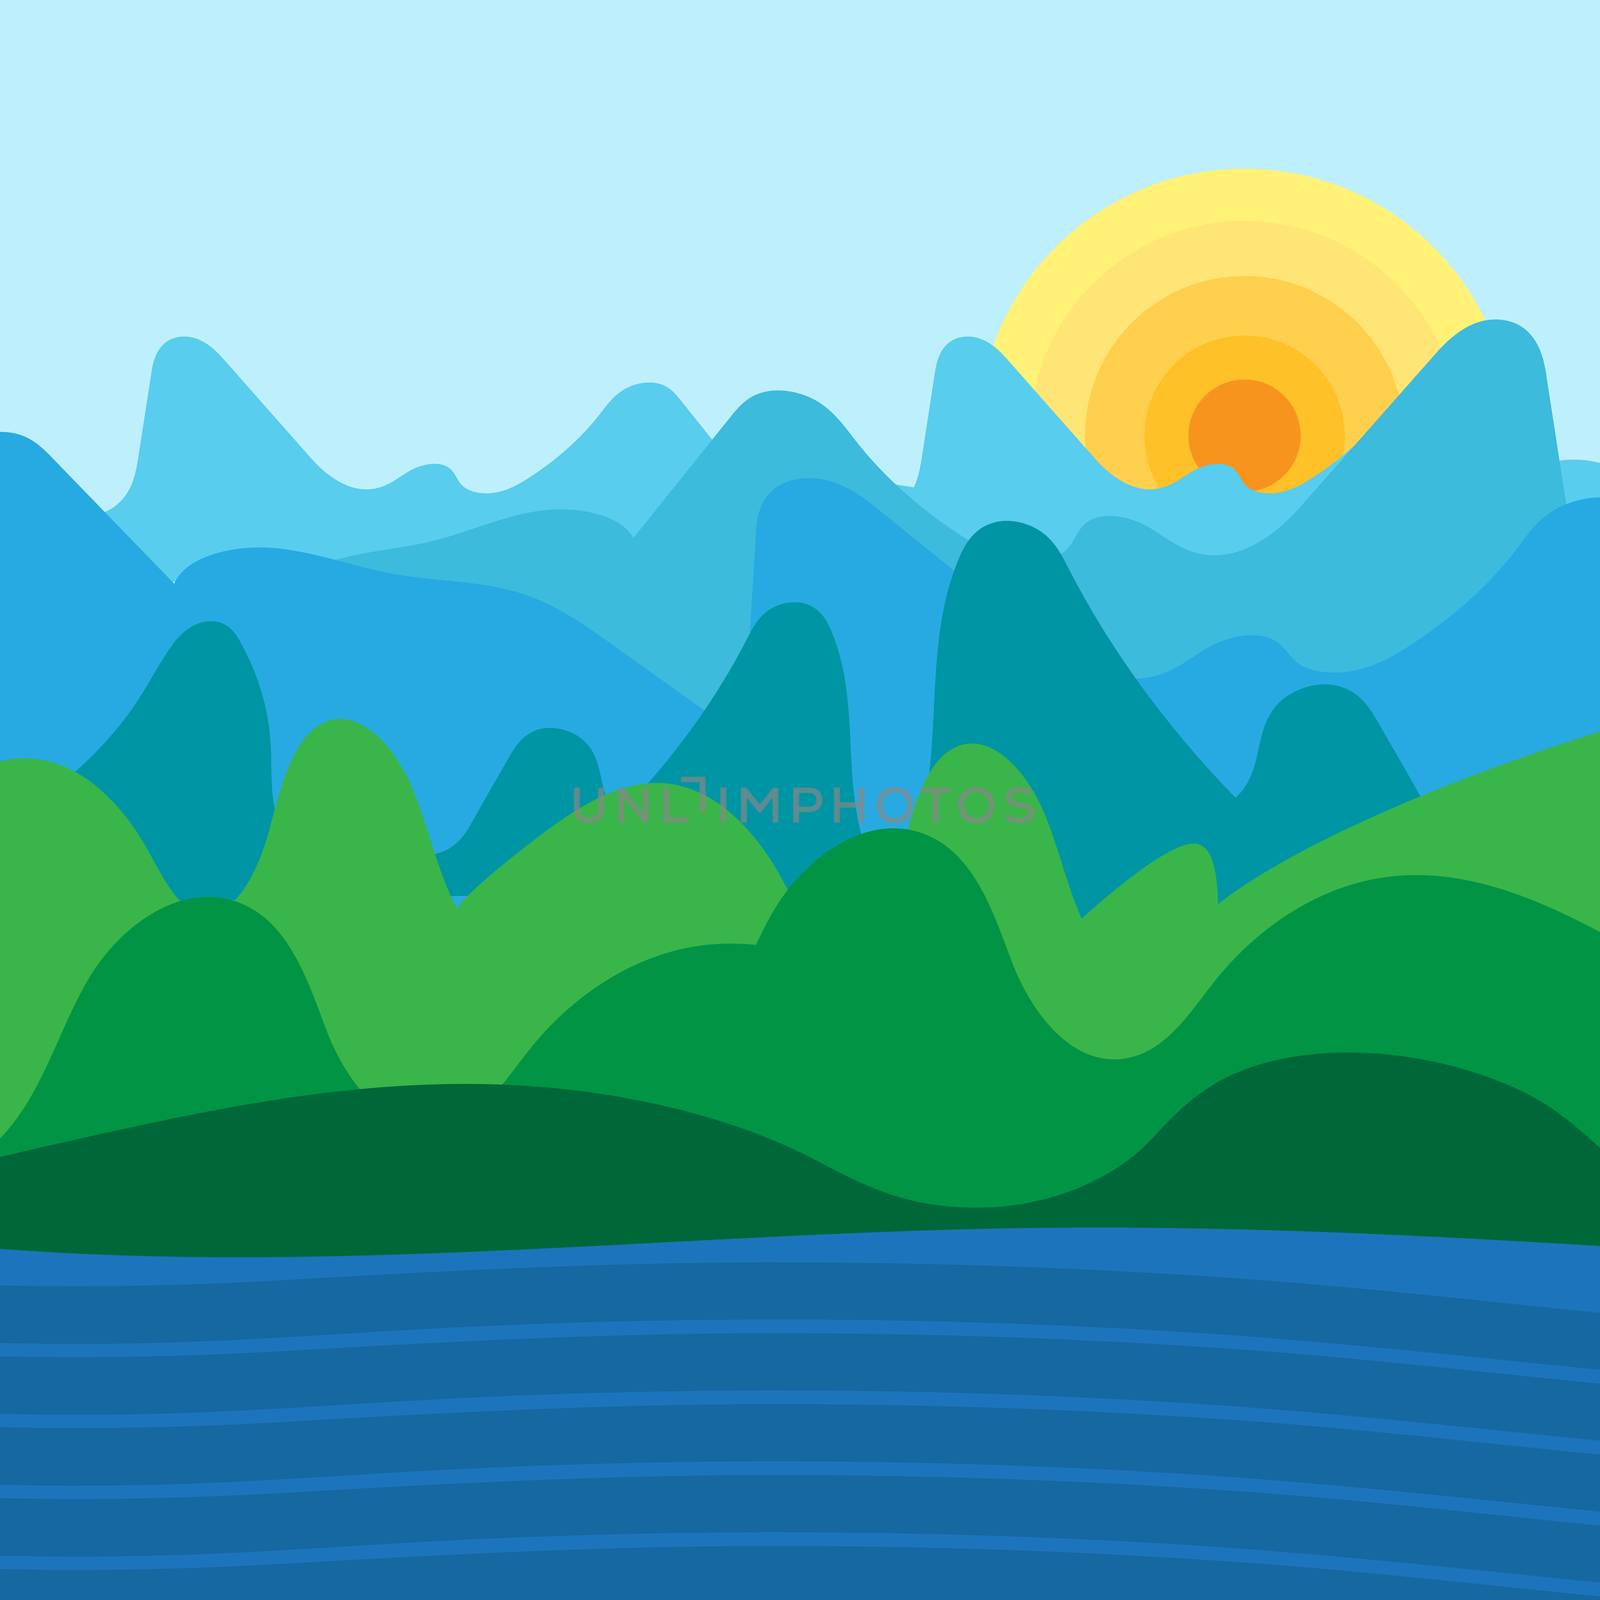 Mountain landscape and nature paysage illustration. Vector